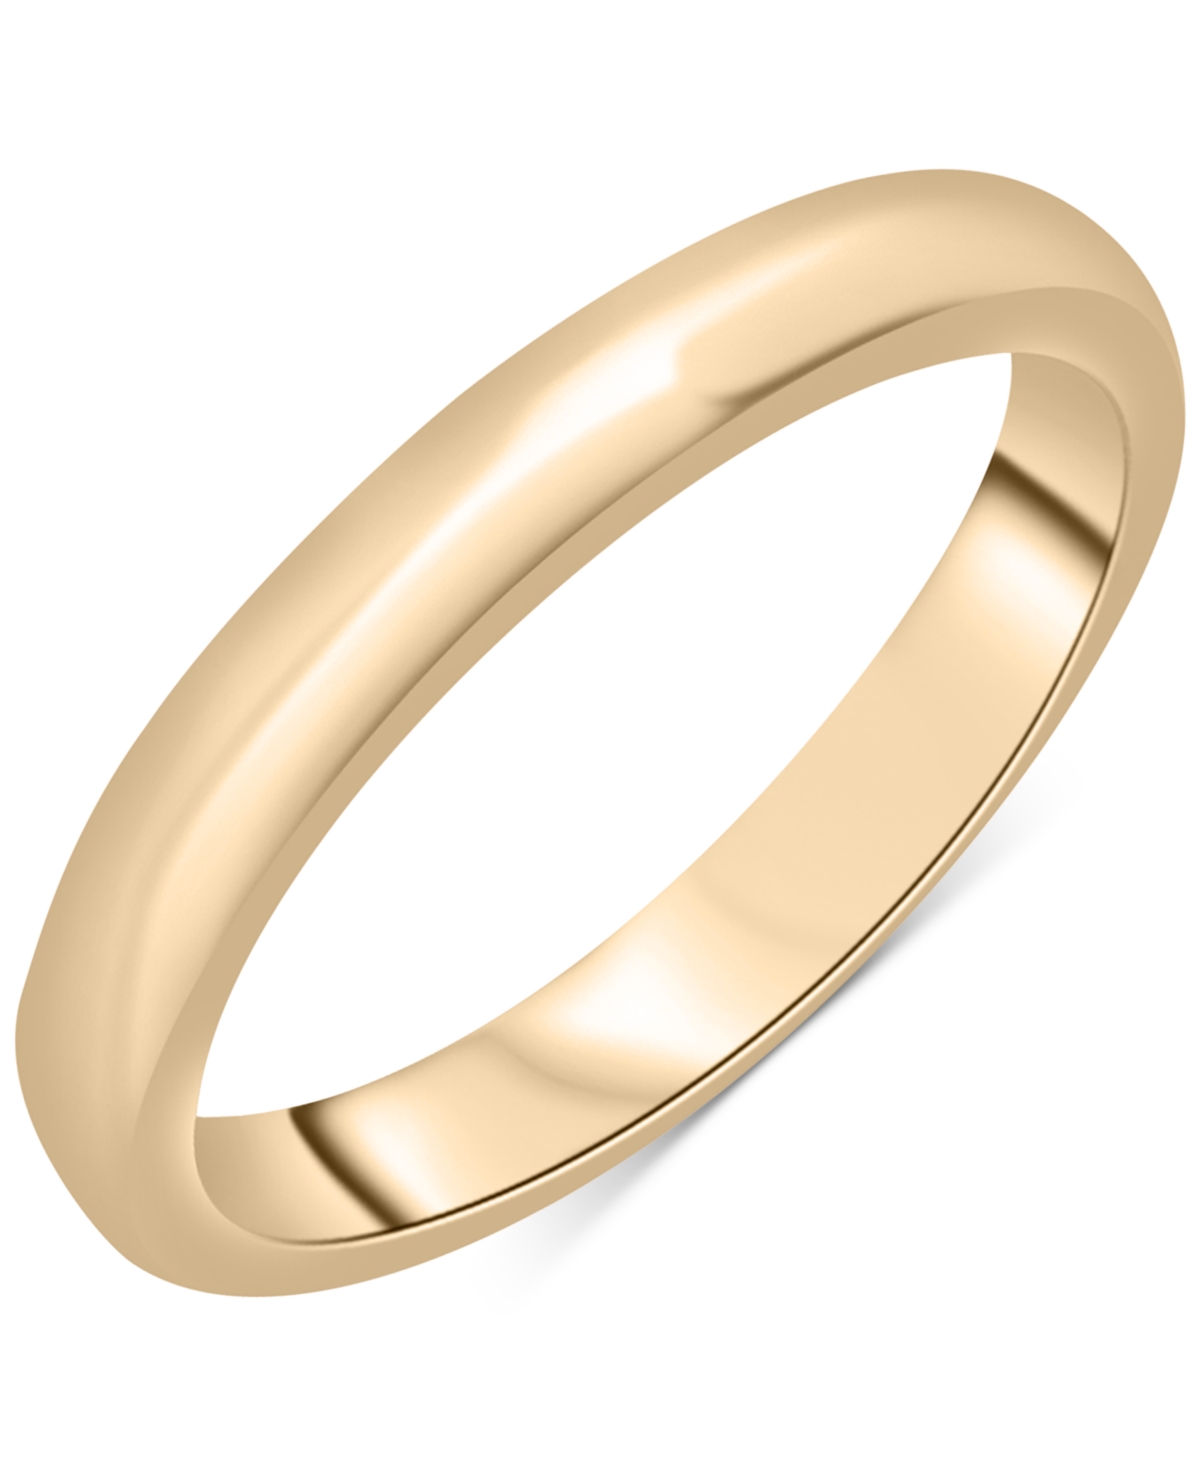 Rounded Band in Gold Vermeil, Created for Macy's - Gold Vermeil